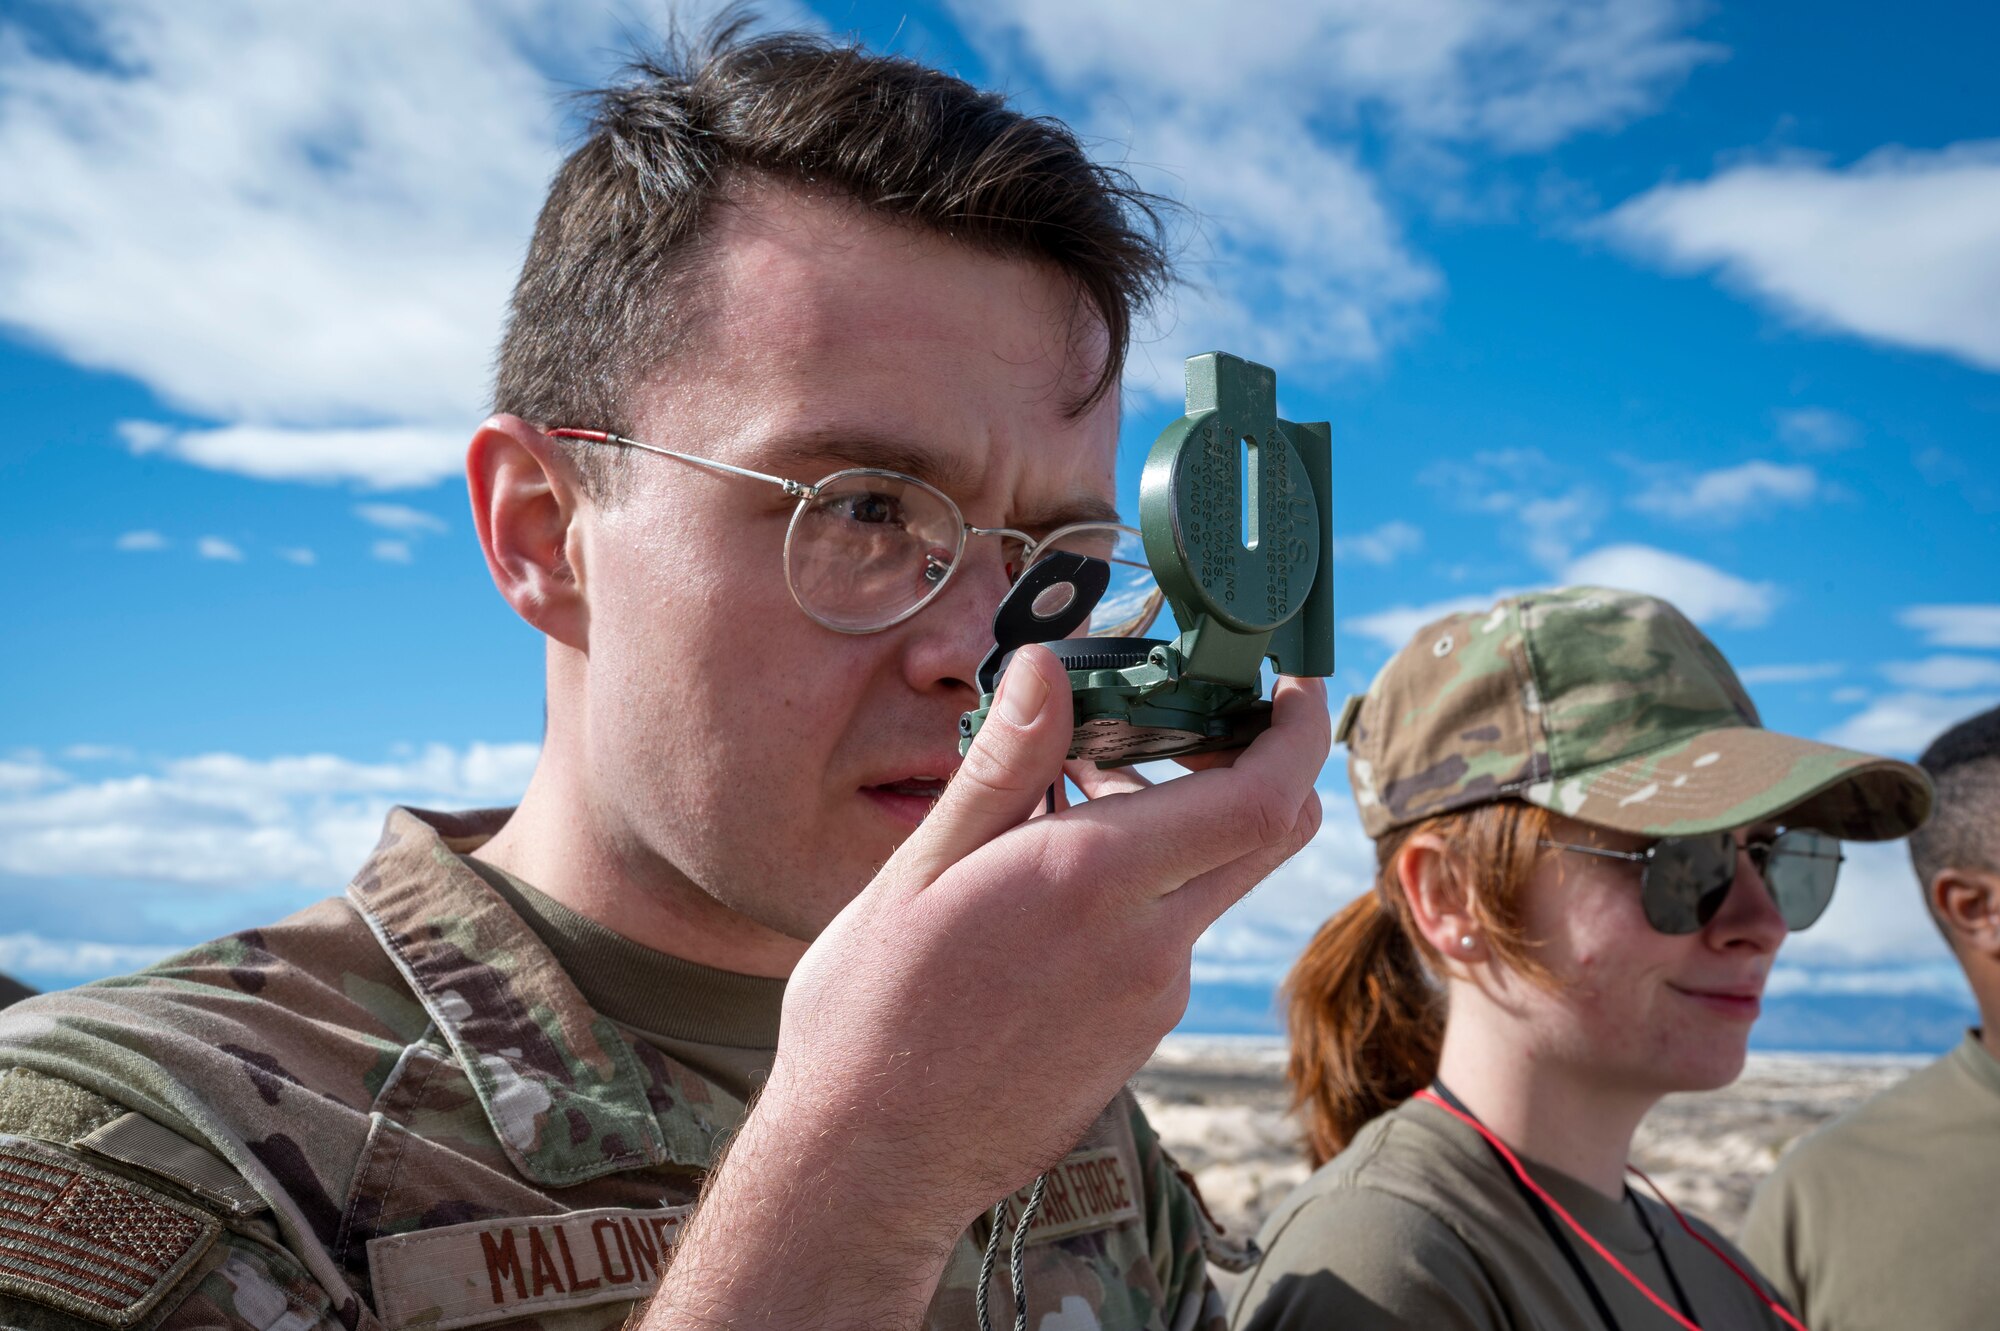 U.S. Air Force Airman 1st Class Joseph Maloney, 54th Operations Support Squadron weather journeyman, uses a compass to chart the surrounding area during an exercise at Holloman Air Force Base, New Mexico, Jan. 22, 2024. The 54th OSS gives updates on weather conditions and mission locations for both Holloman and occasionally the White Sands Missile Range. (U.S Air Force photo by Airman 1st Class Isaiah Pedrazzini)